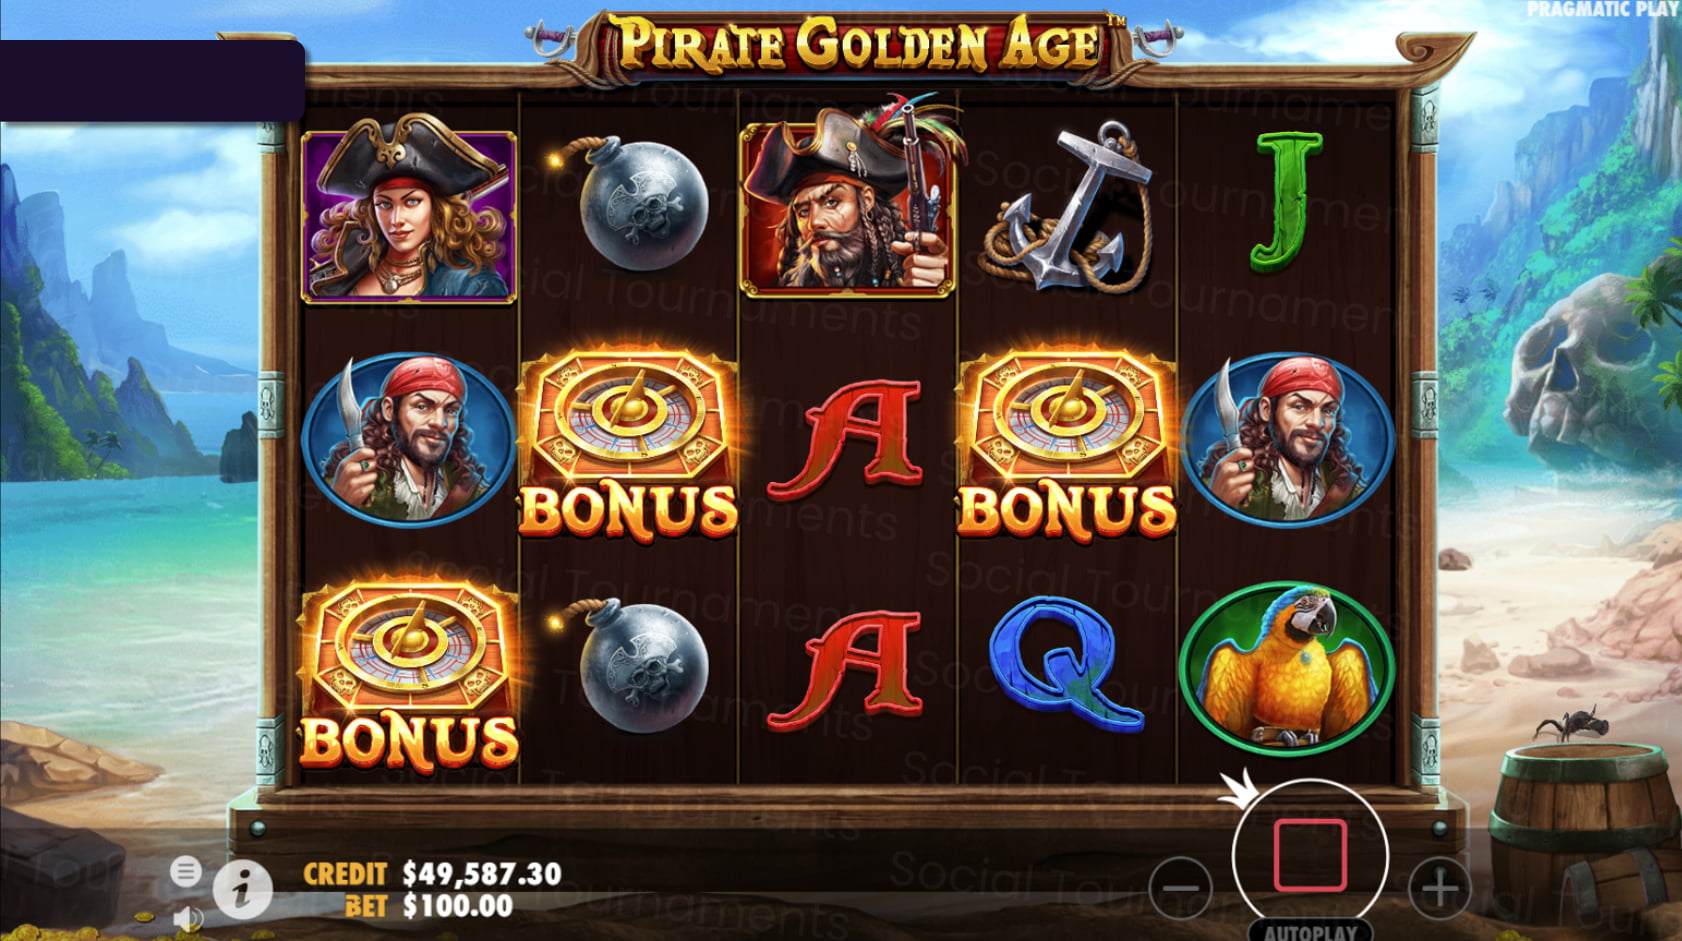 Pirate Golden Age By Pragmatic Play